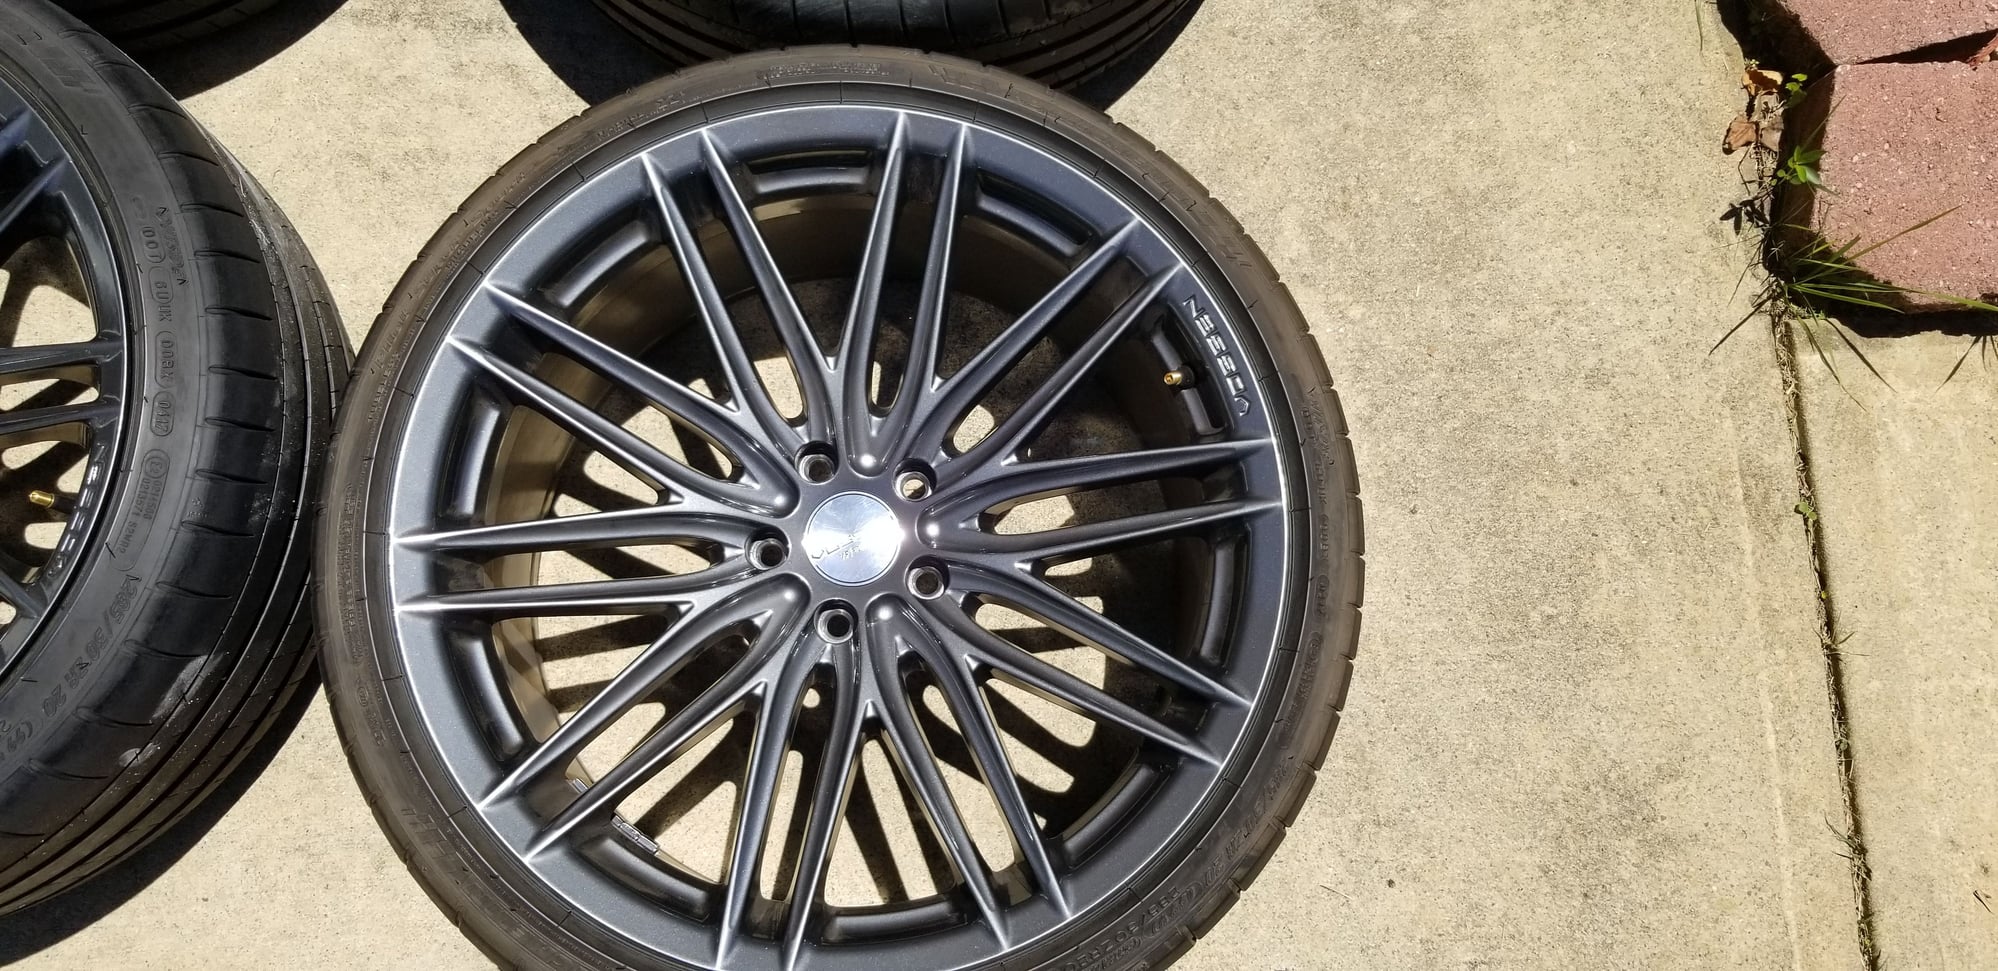 Wheels and Tires/Axles - 20 inch Vossen VFS-4 Hybrid Forged Wheels + Michelin PPS tires ($1,800) - Used - All Years Mercedes-Benz All Models - Suwanee, GA 30024, United States